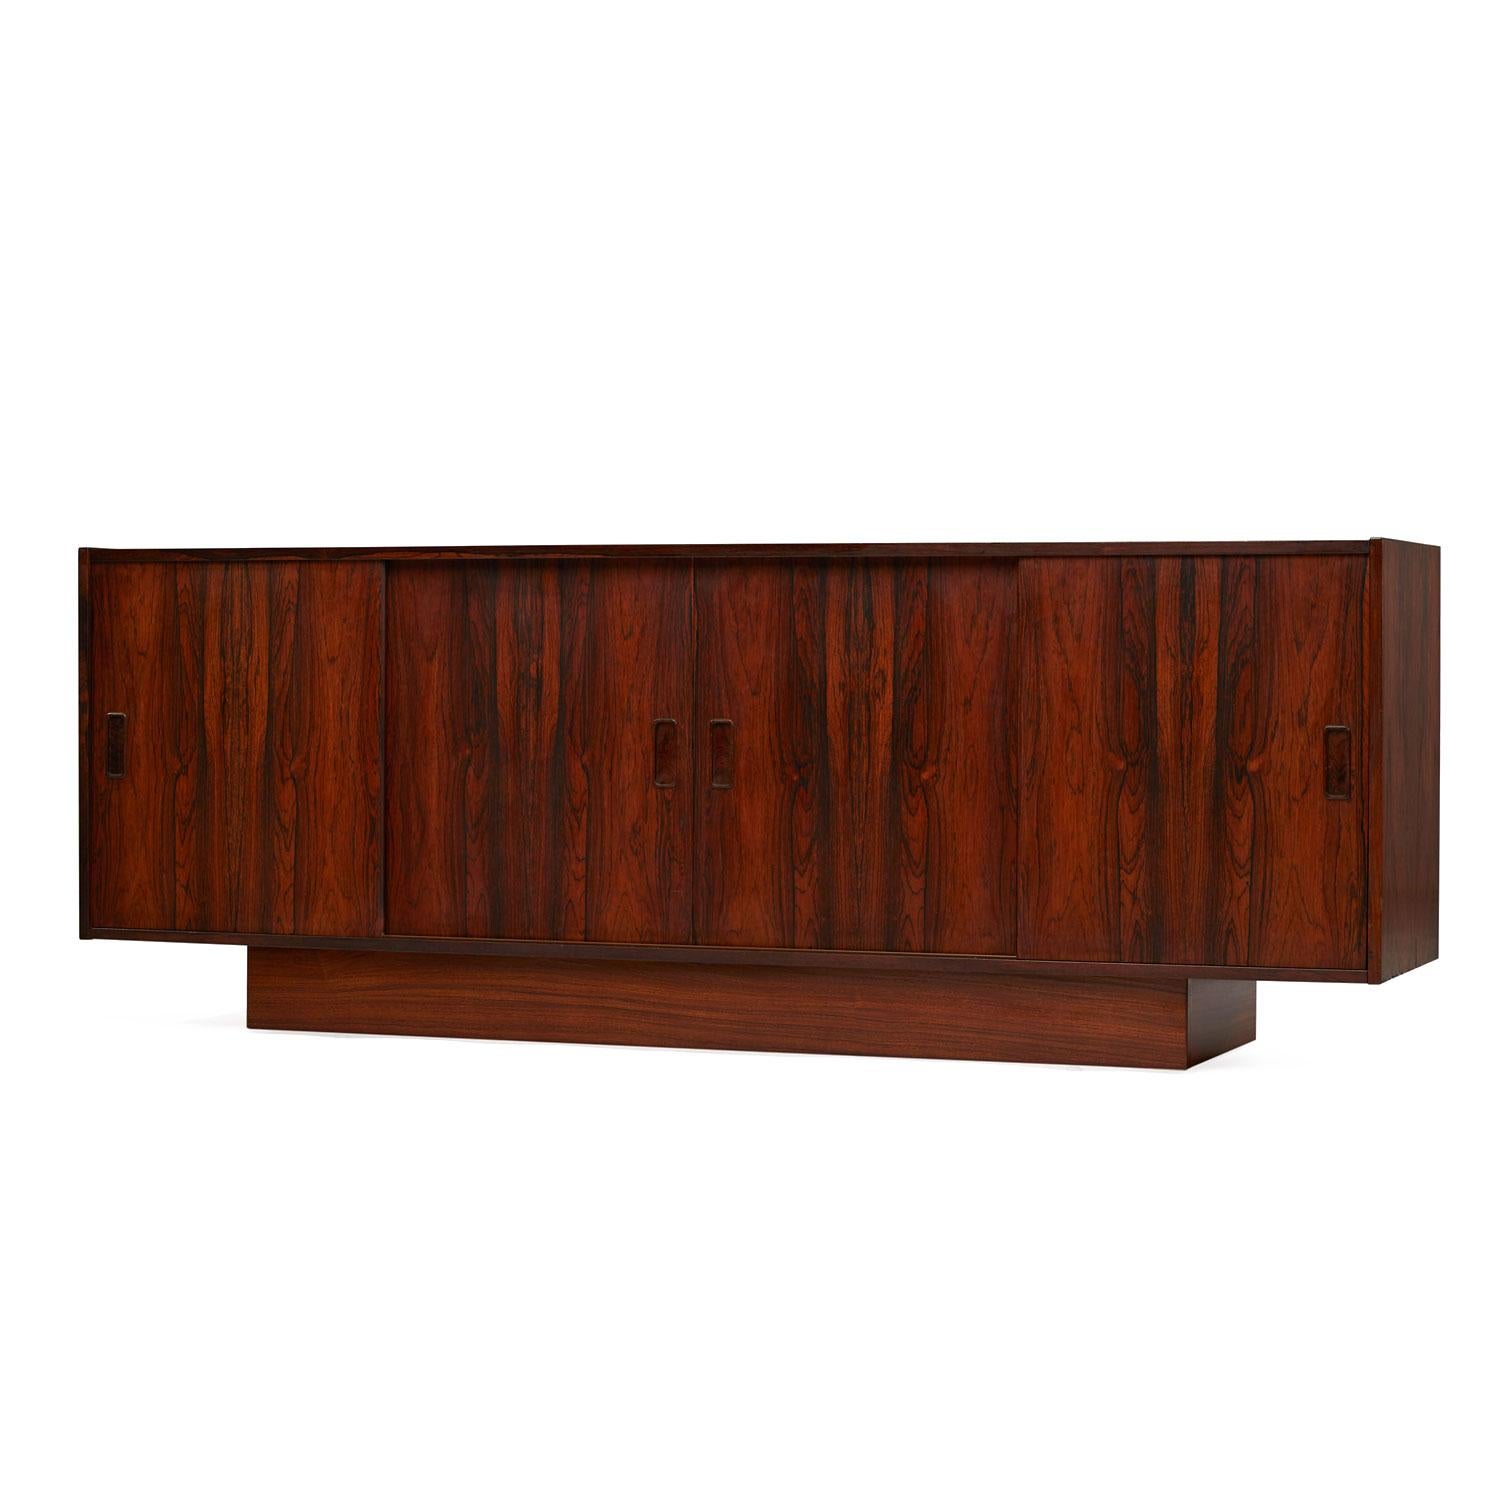 Late 20th Century Long Low Danish Modern Rosewood Sliding Door Front Credenza Media Cabinet